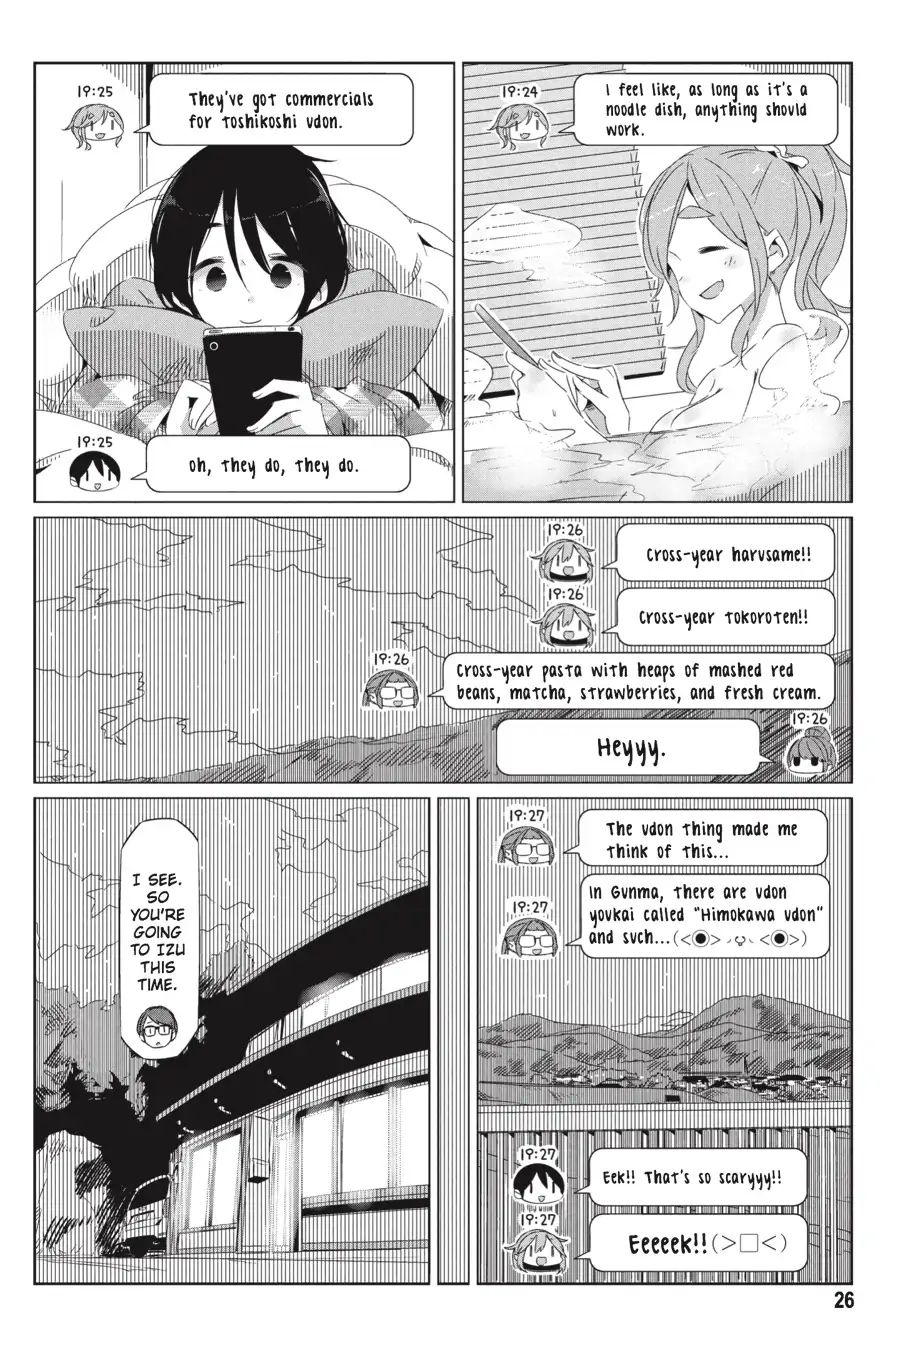 Yurucamp Vol.5 Chapter 24: December Work and Everyone's Day Off